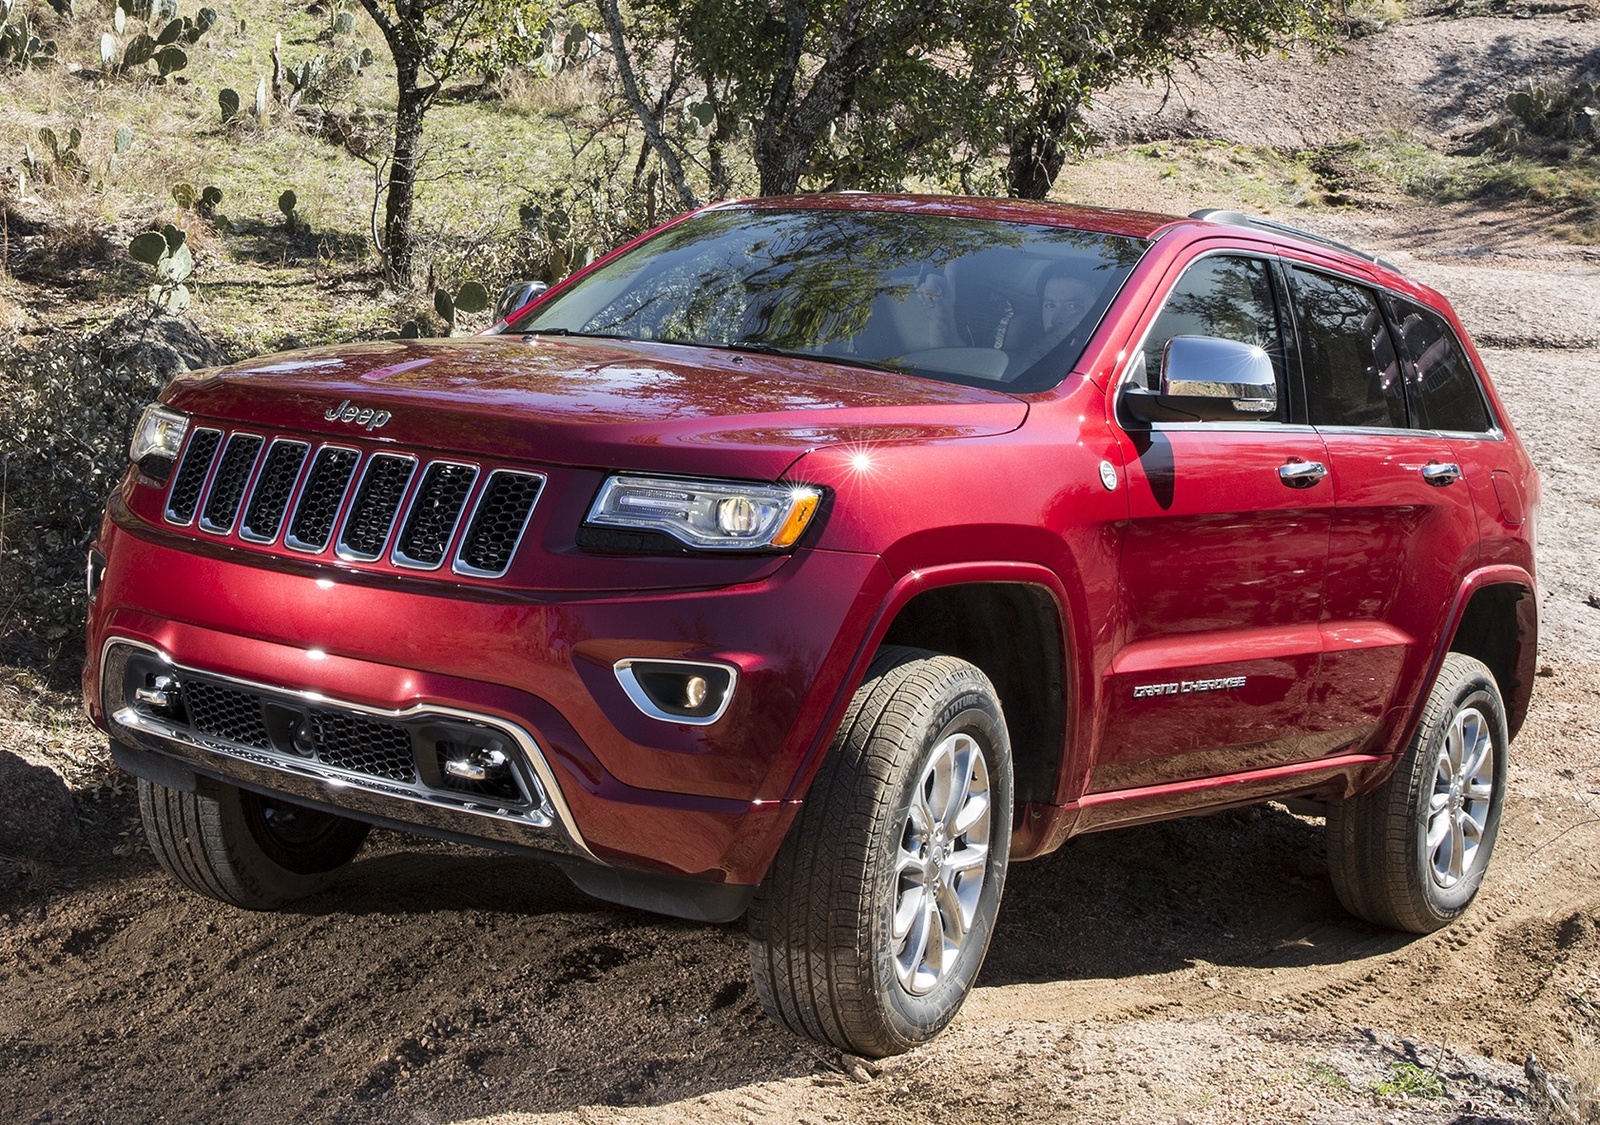 Jeep Grand Cherokee Search Pictures Photos